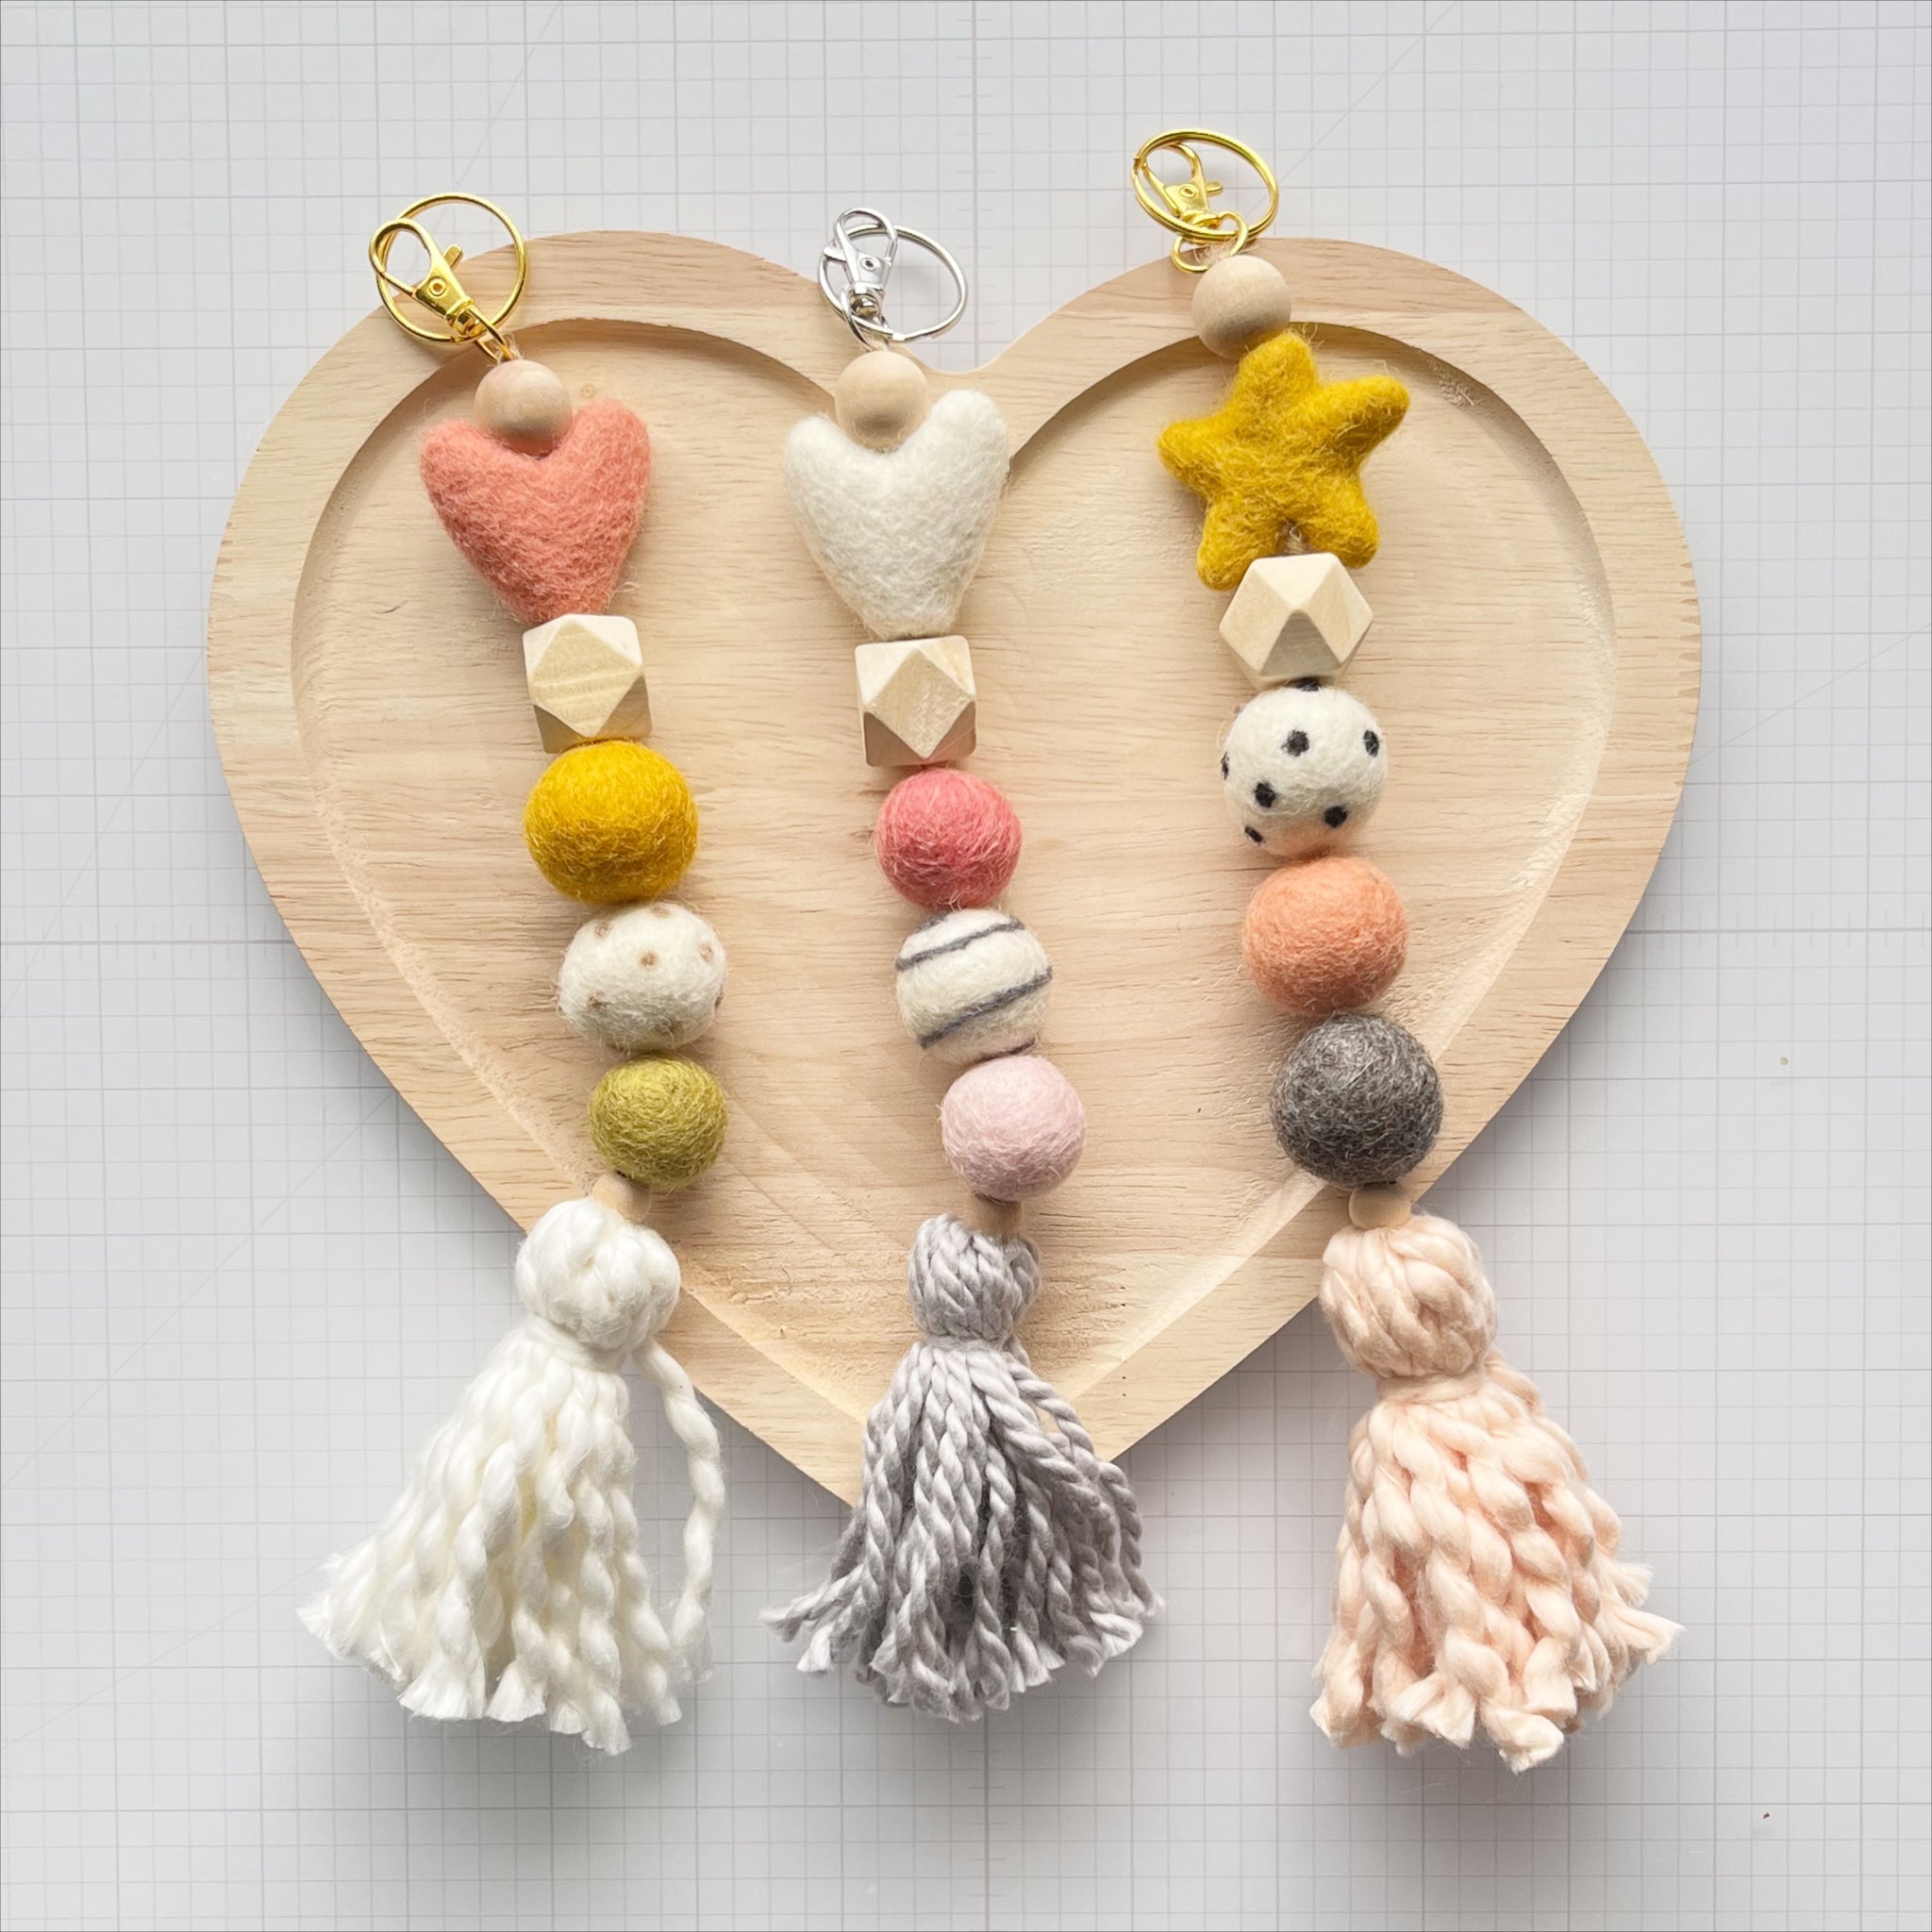 Felt Ball and Wood Bead Keychain Craft Kit With Wool Felted Gold Star –  Heartgrooves Handmade